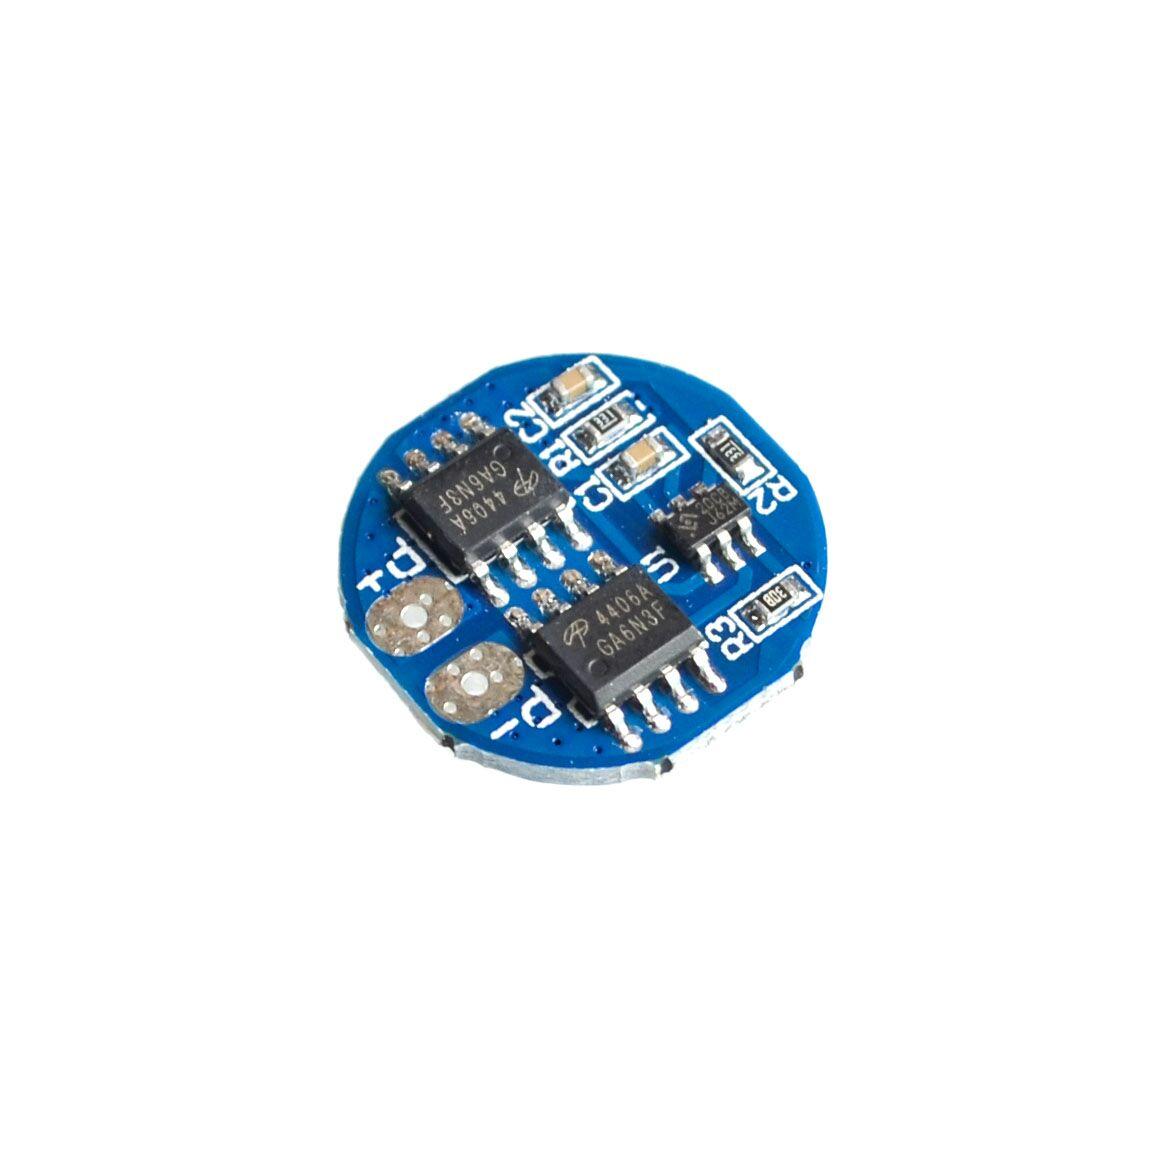 10PCS-LOT-2S-5A-Li-ion-Lithium-Battery-7-4v-8-4V-18650-Charger-Protection-Board-bms-pcm-for-li-ion-lipo-battery-cell-pack